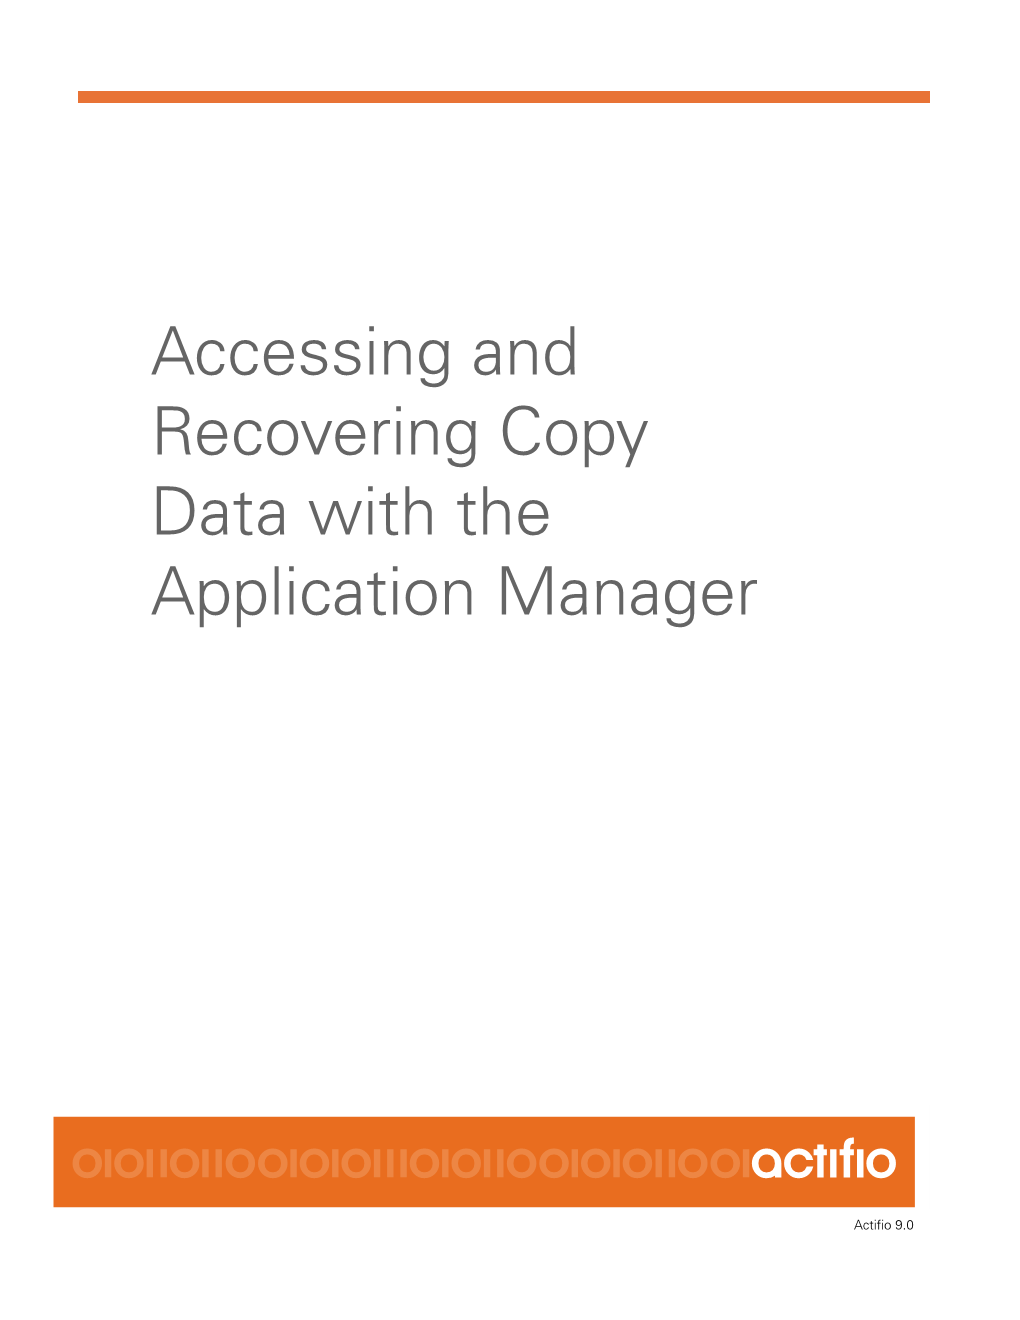 Accessing and Recovering Copy Data with the Application Manager